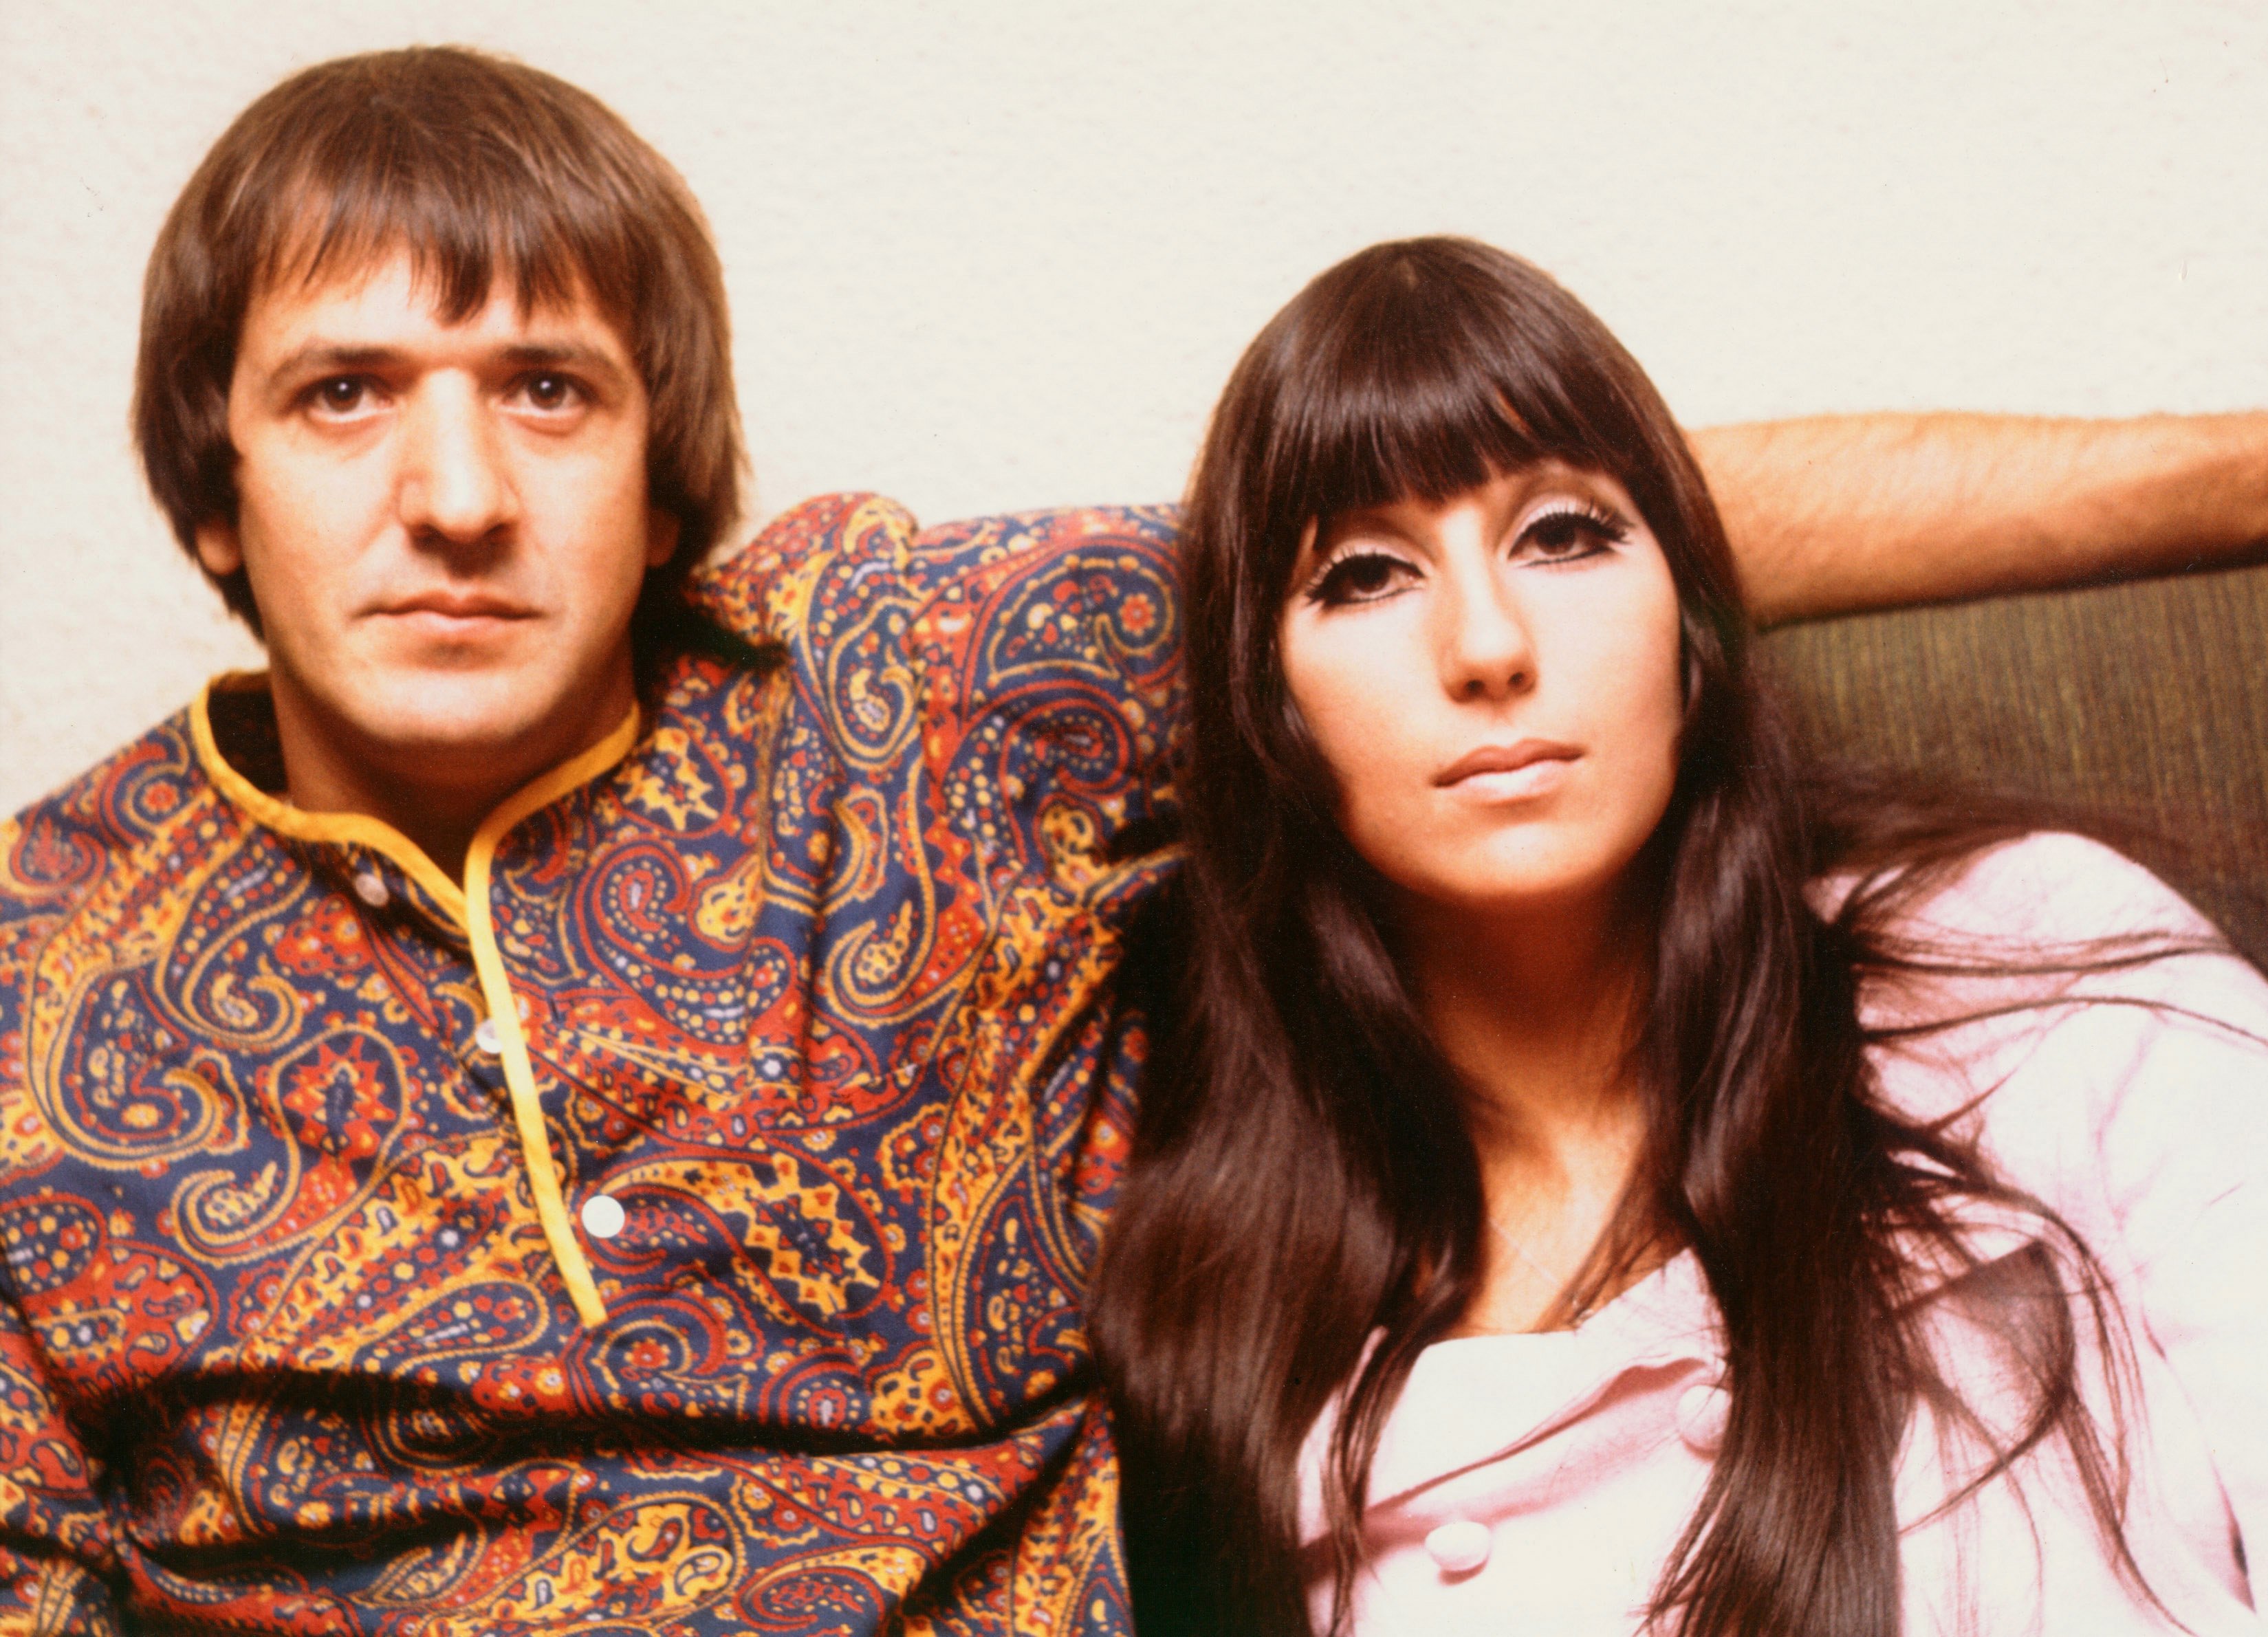 Sonny and Cher circa 1965. | Source: Getty Images